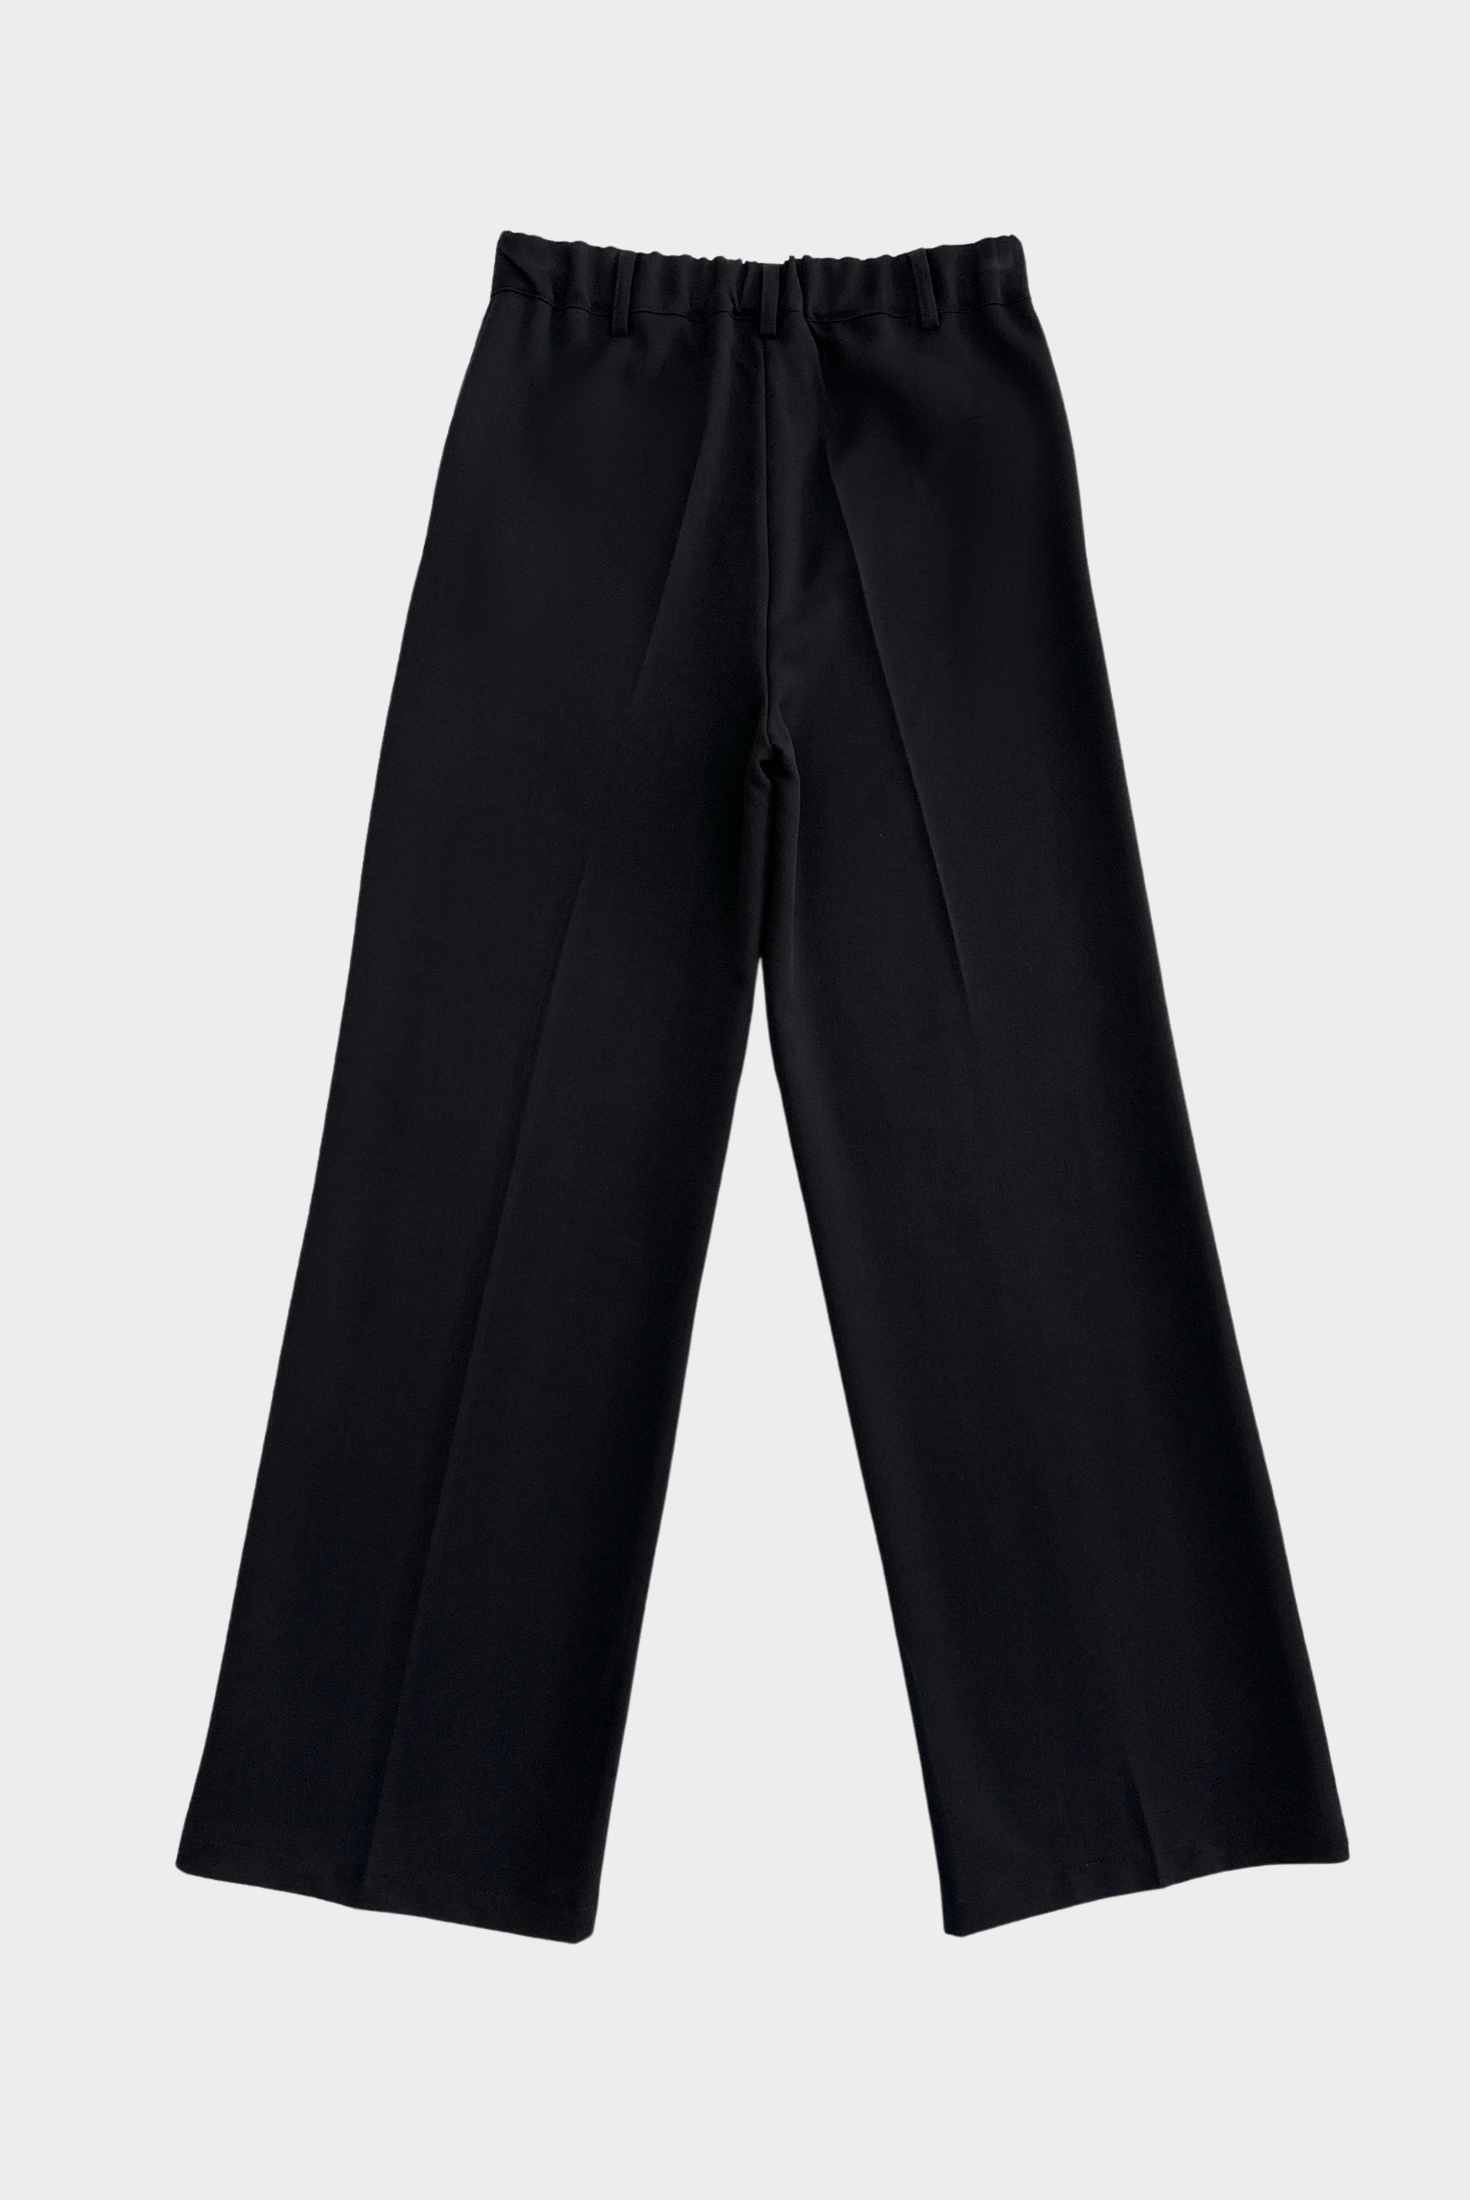 HIGH WAISTED DAD TROUSER IN BLACK